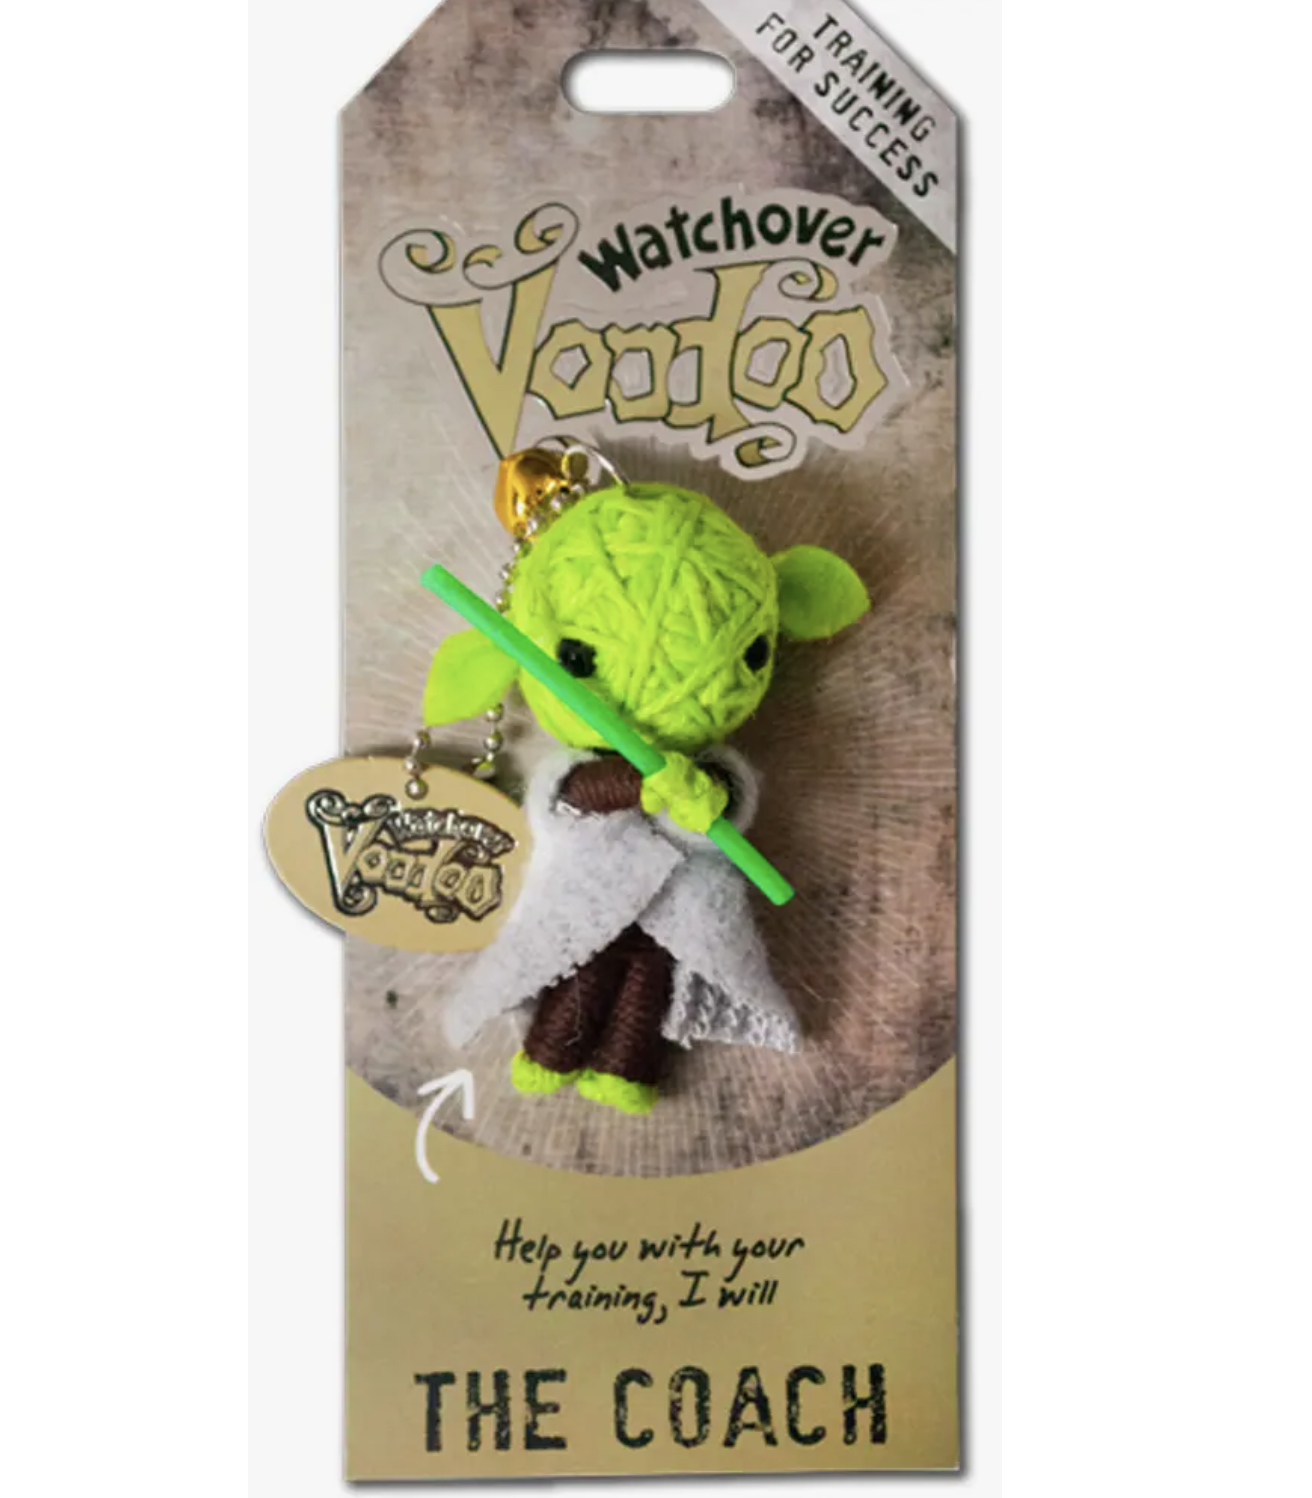 The Coach Voodoo Doll